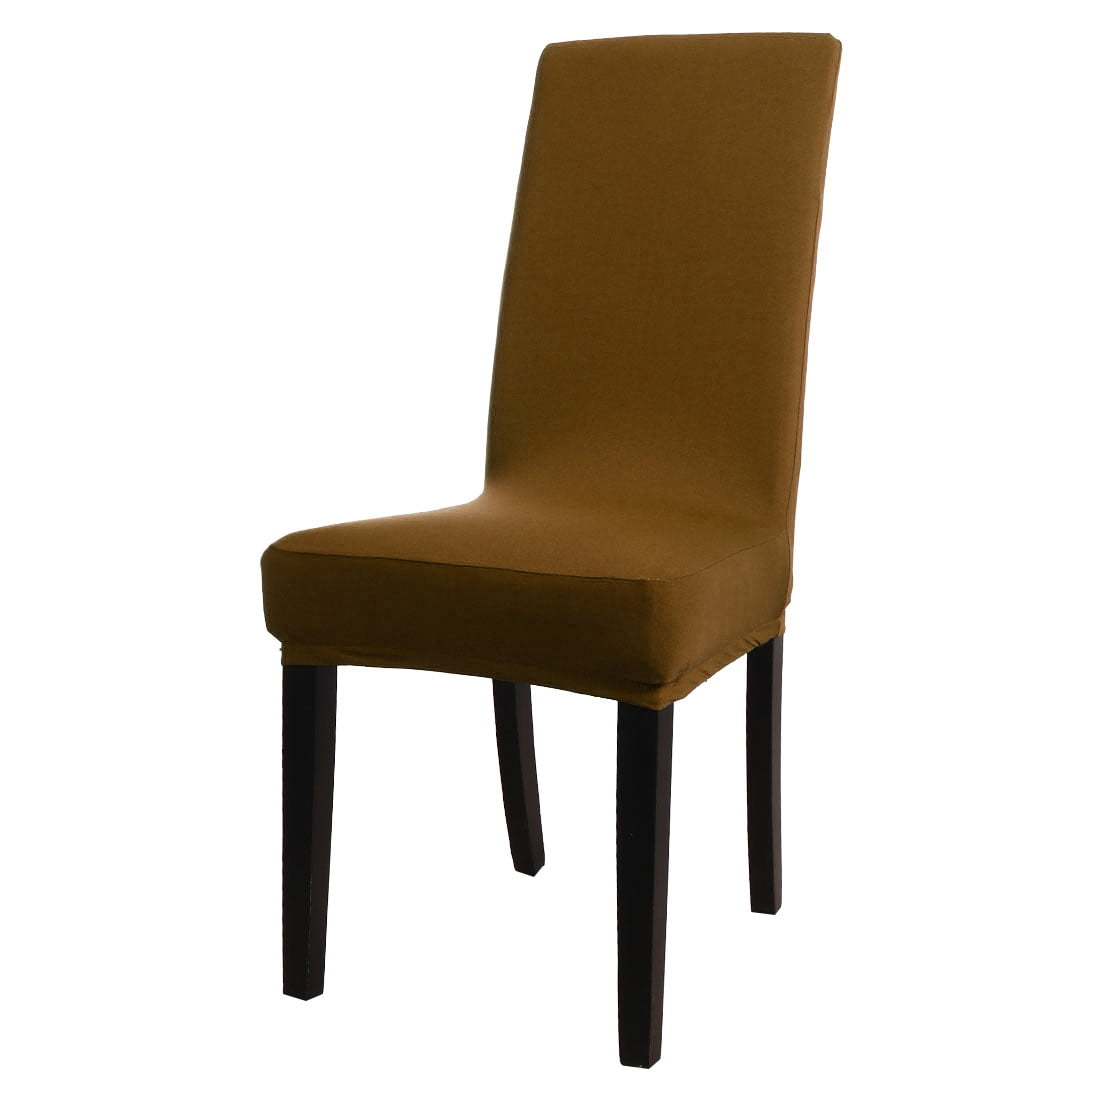 22 MOCAA Stretch Slipcover Chair Protectors for Short Back Chair Bar Stool Chair,ONLY Chair Covers